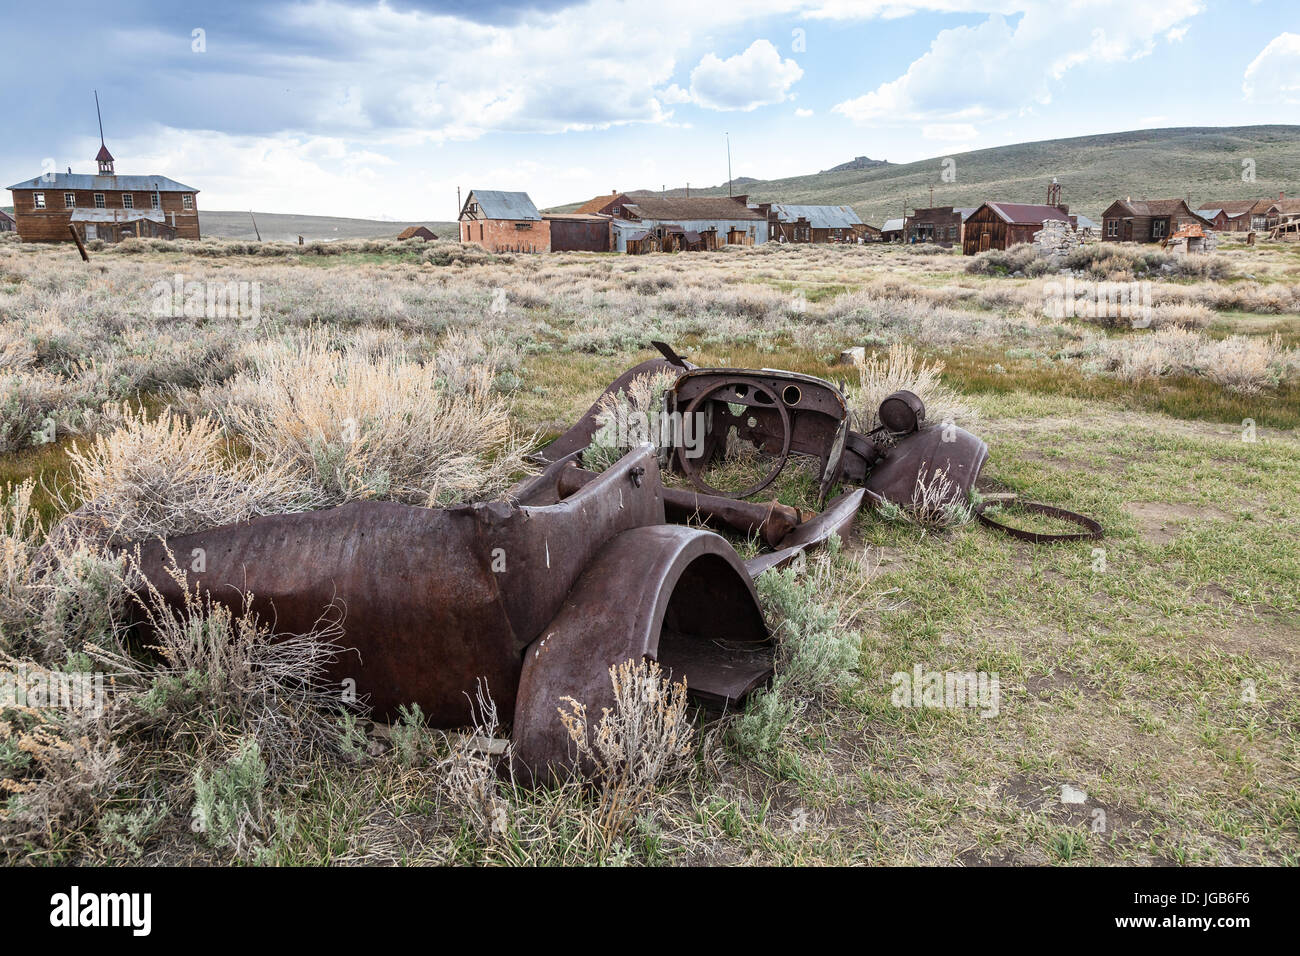 Old rusted car in a field near Bodie, California Stock Photo